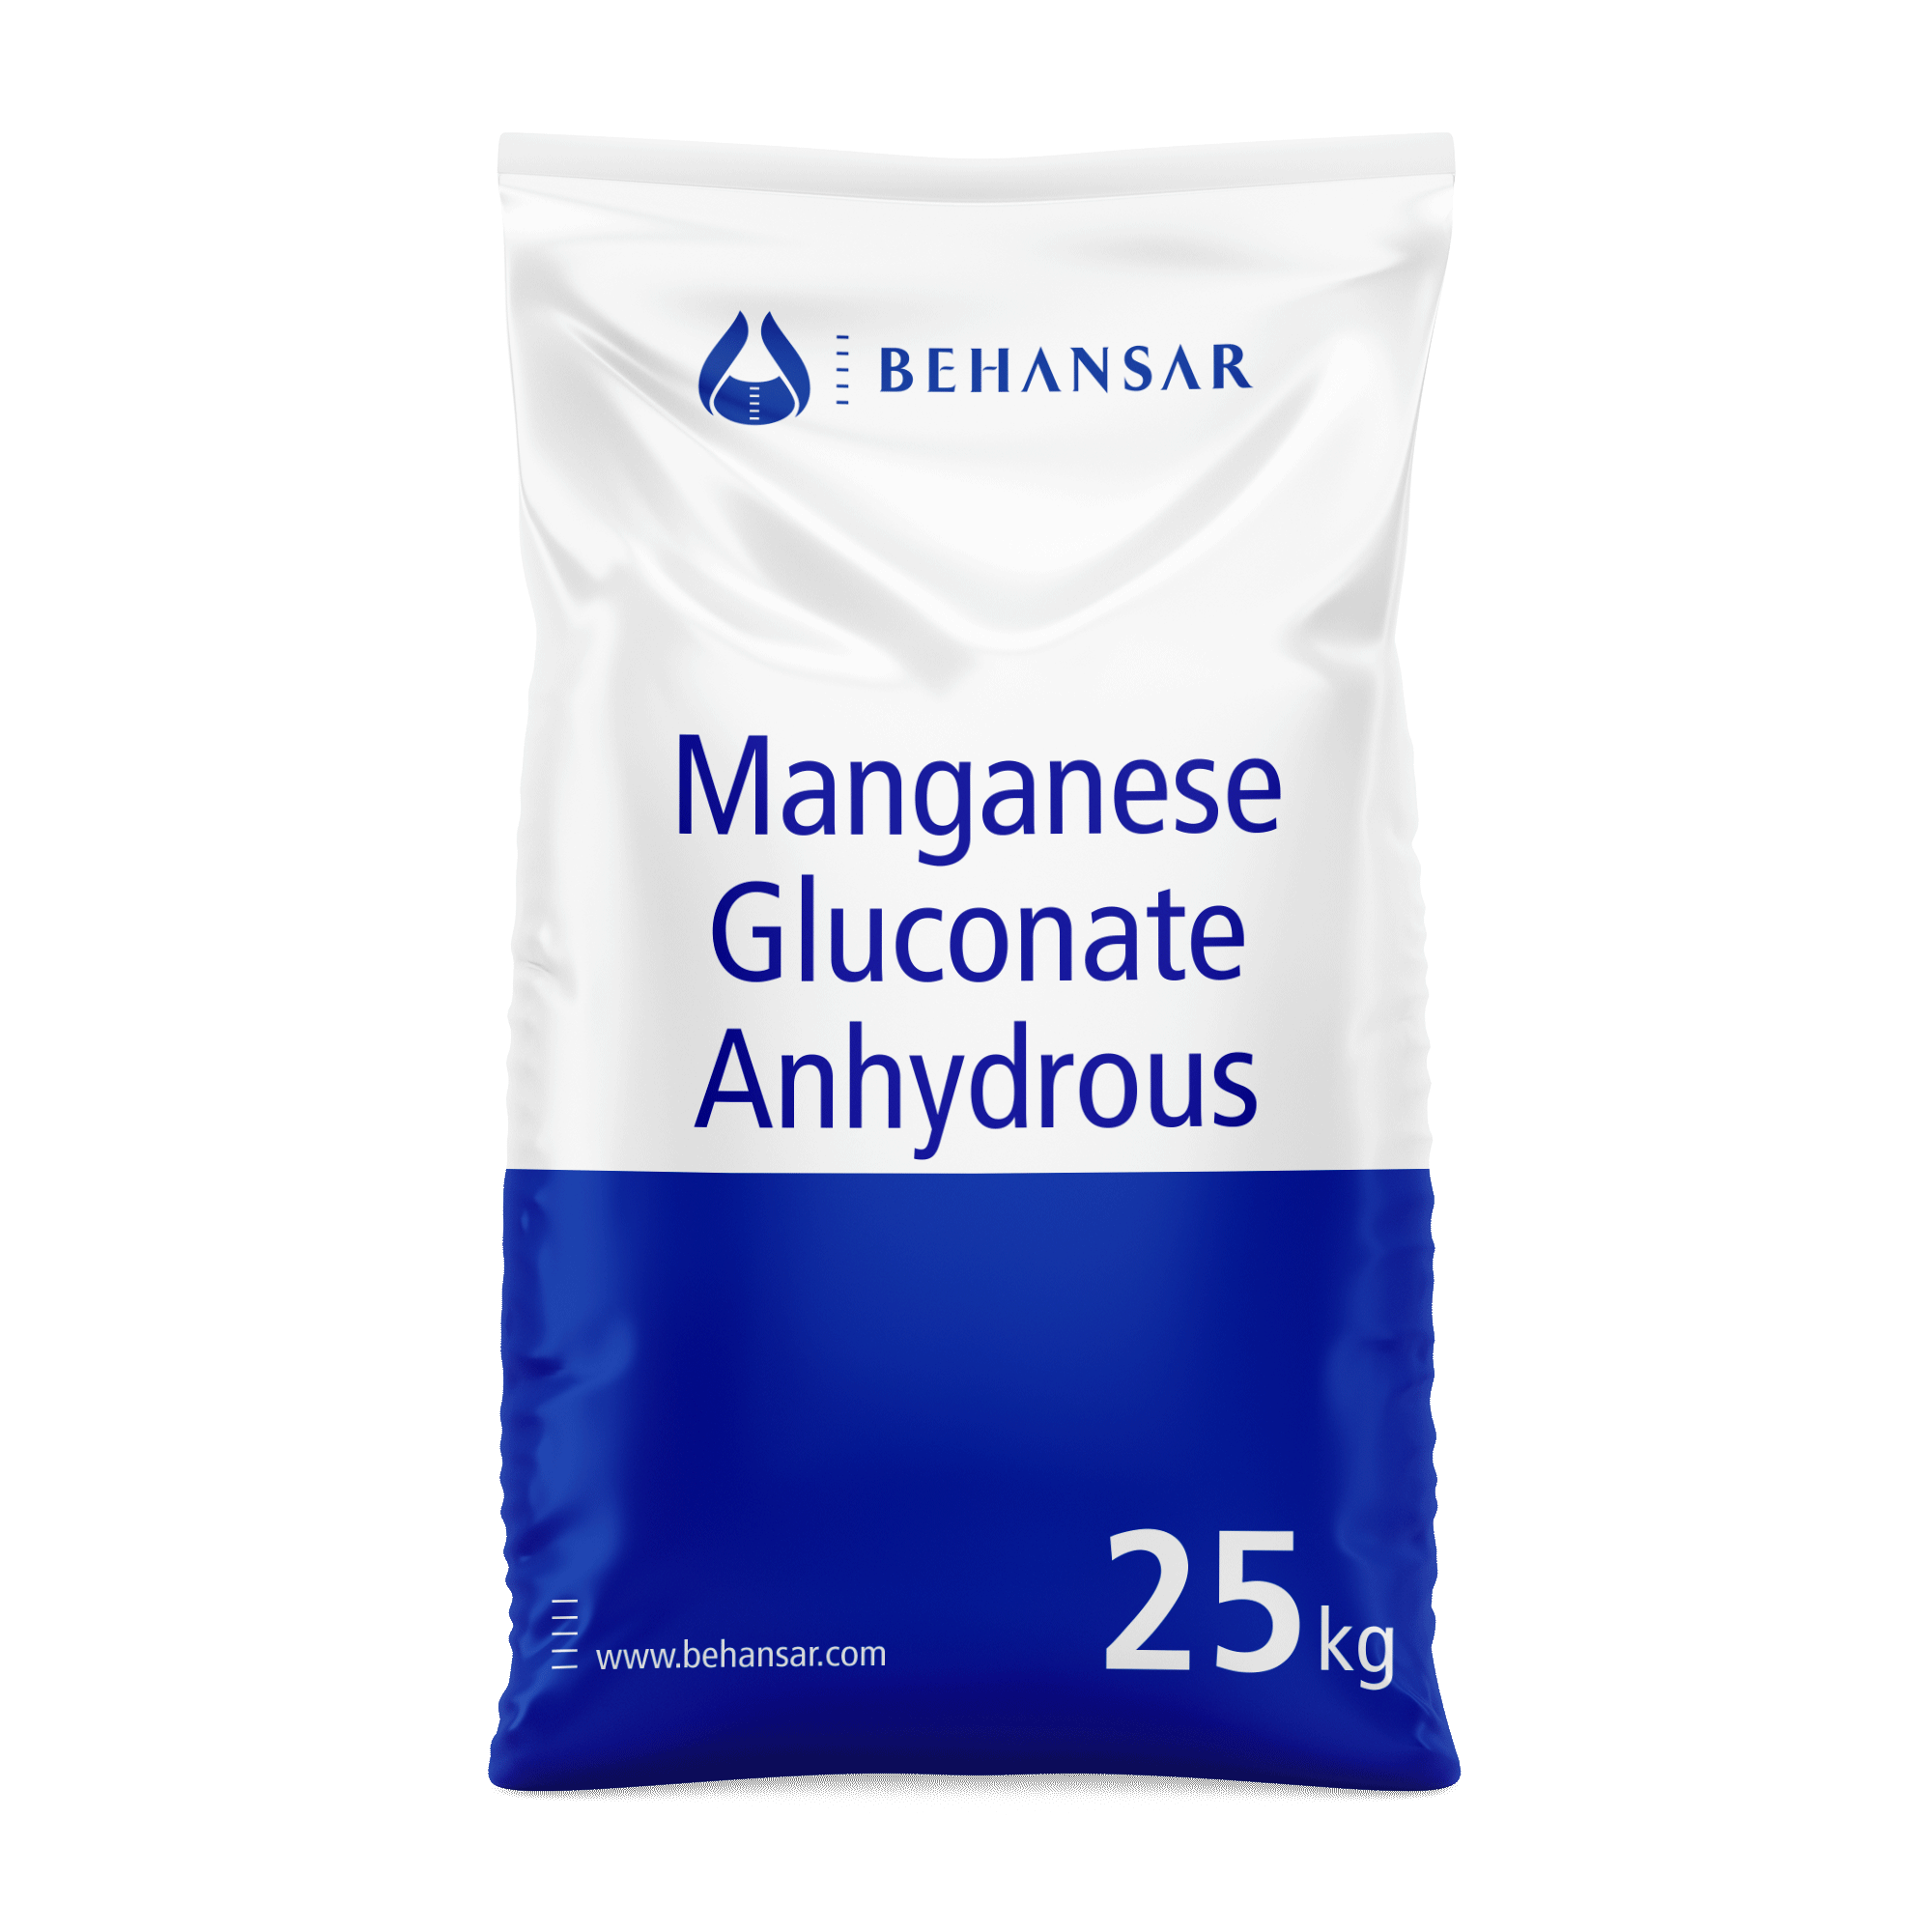 Manganese Gluconate Anhydrous is one of the products of Behansar Co